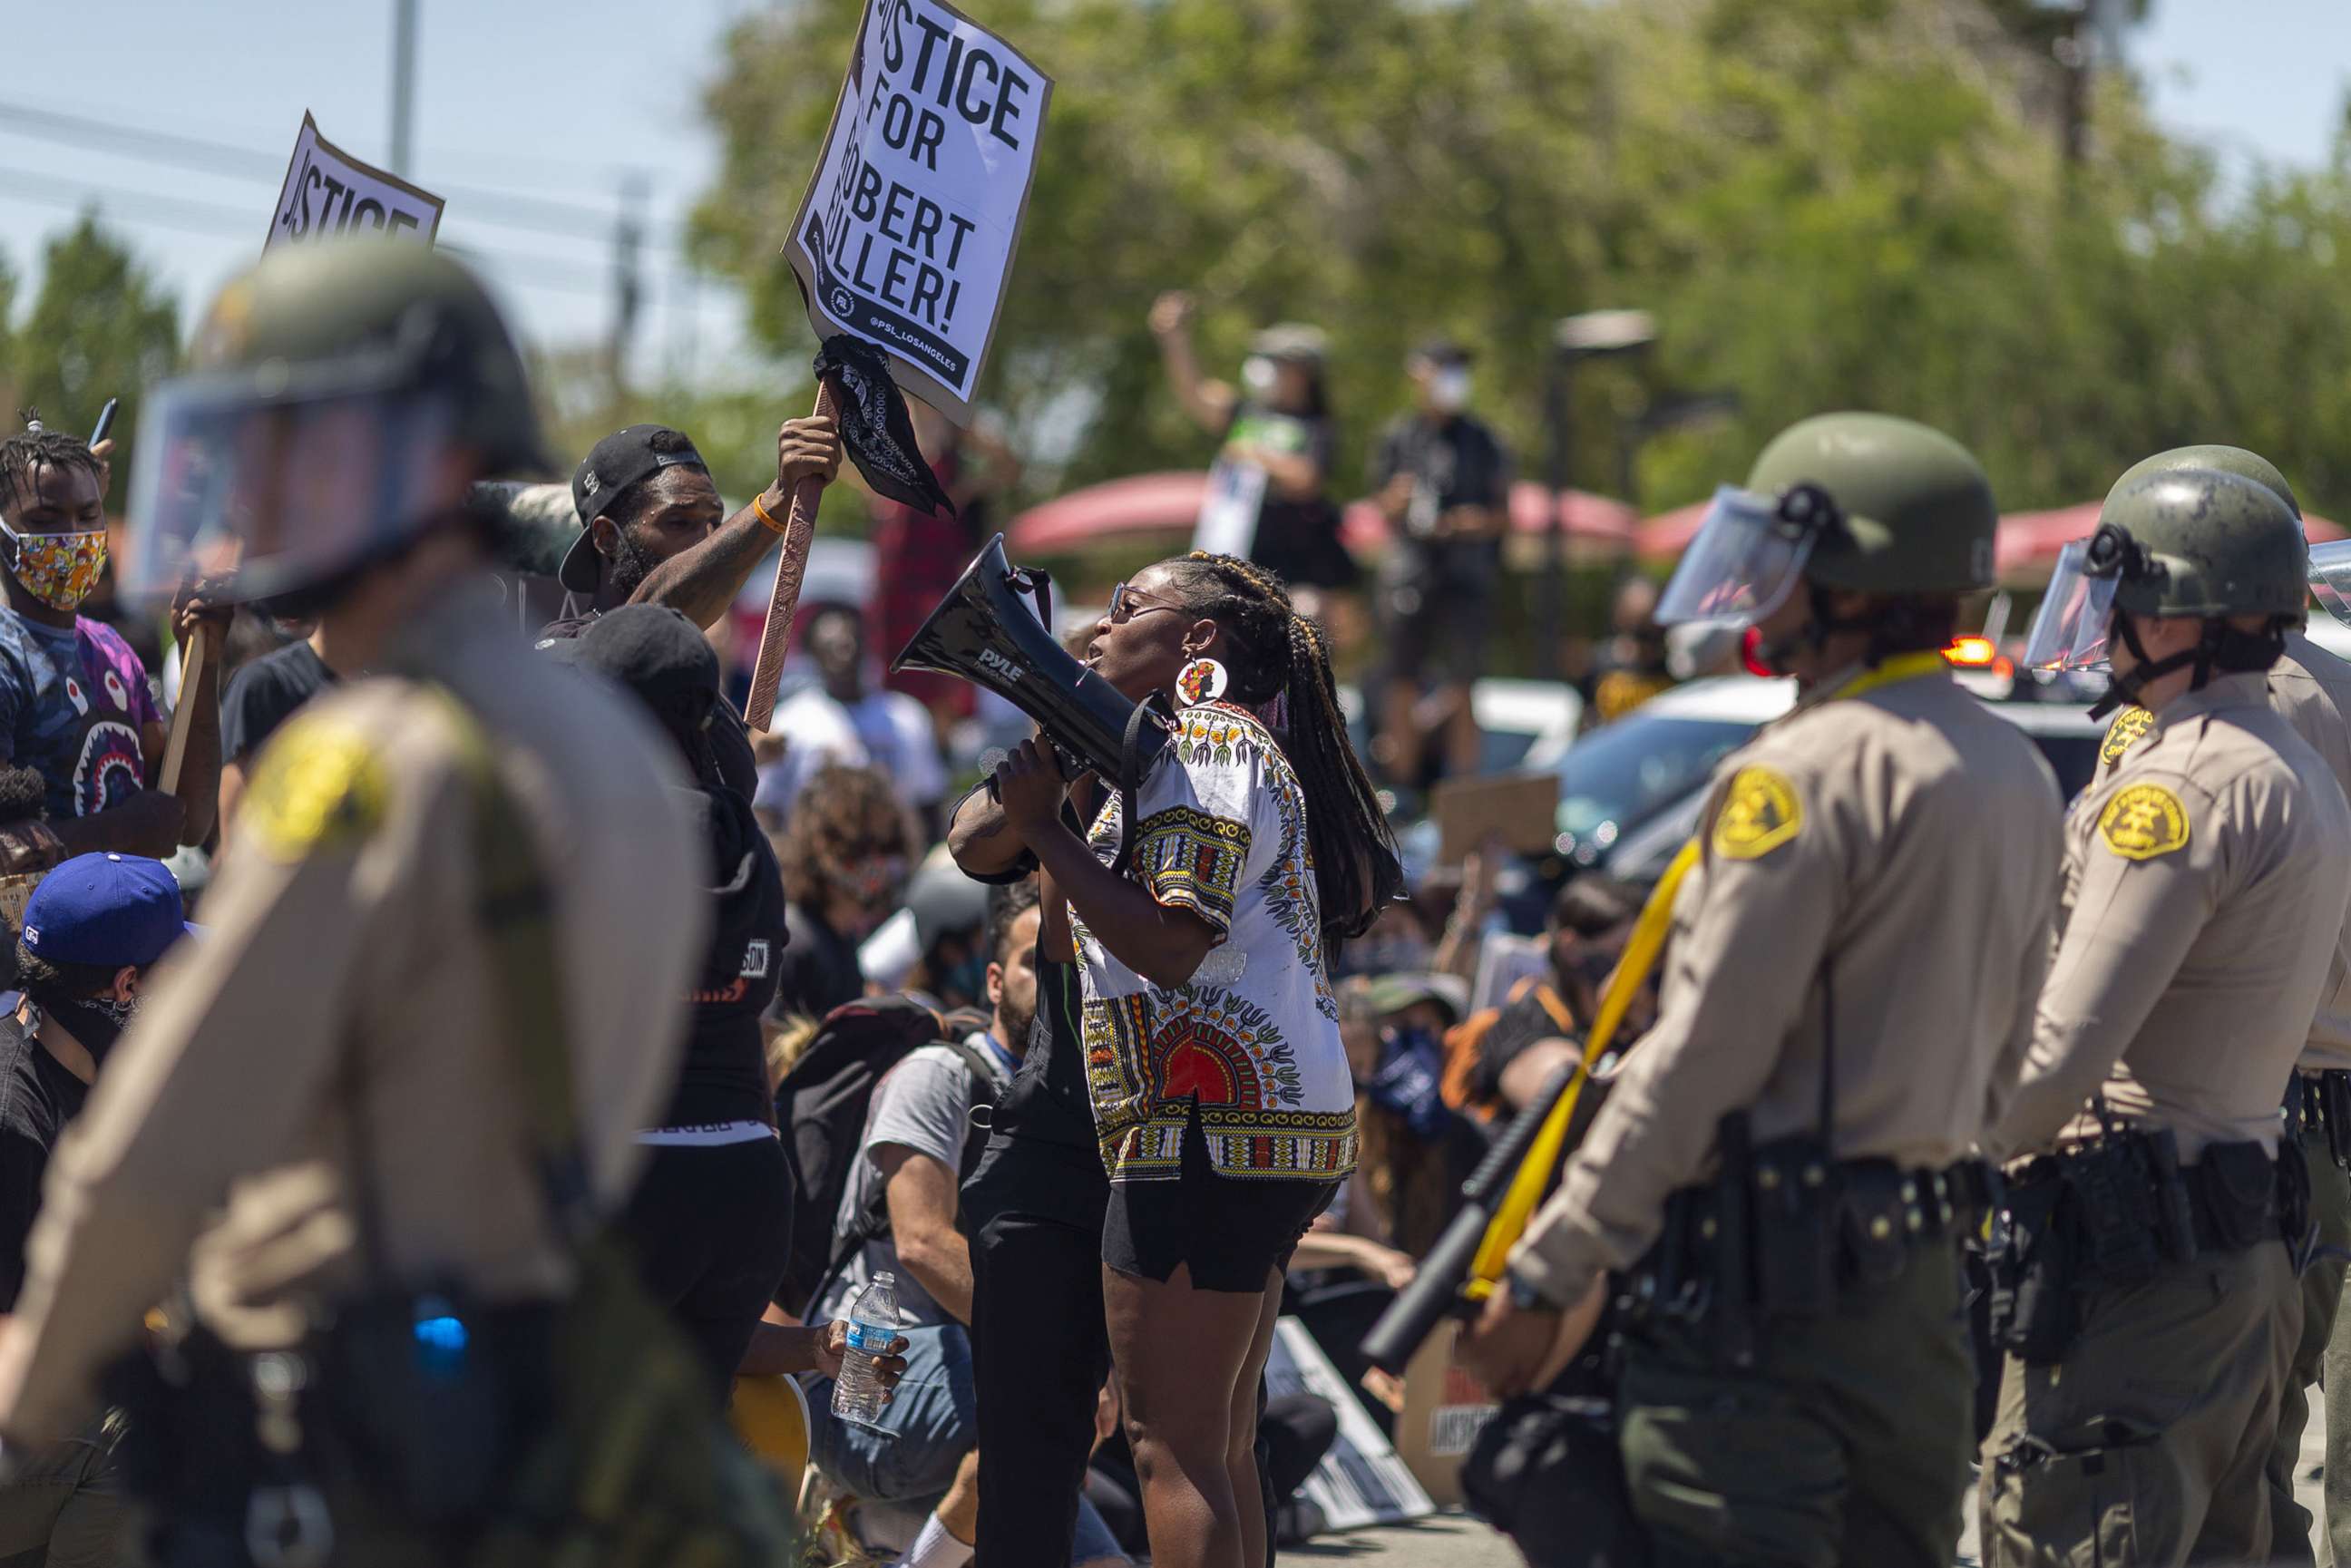 PHOTO: Officers block marchers from continuing down E. Palmdale Boulevard (State Route 138) after a demonstration, June 13, 2020, in Palmdale, Calif.